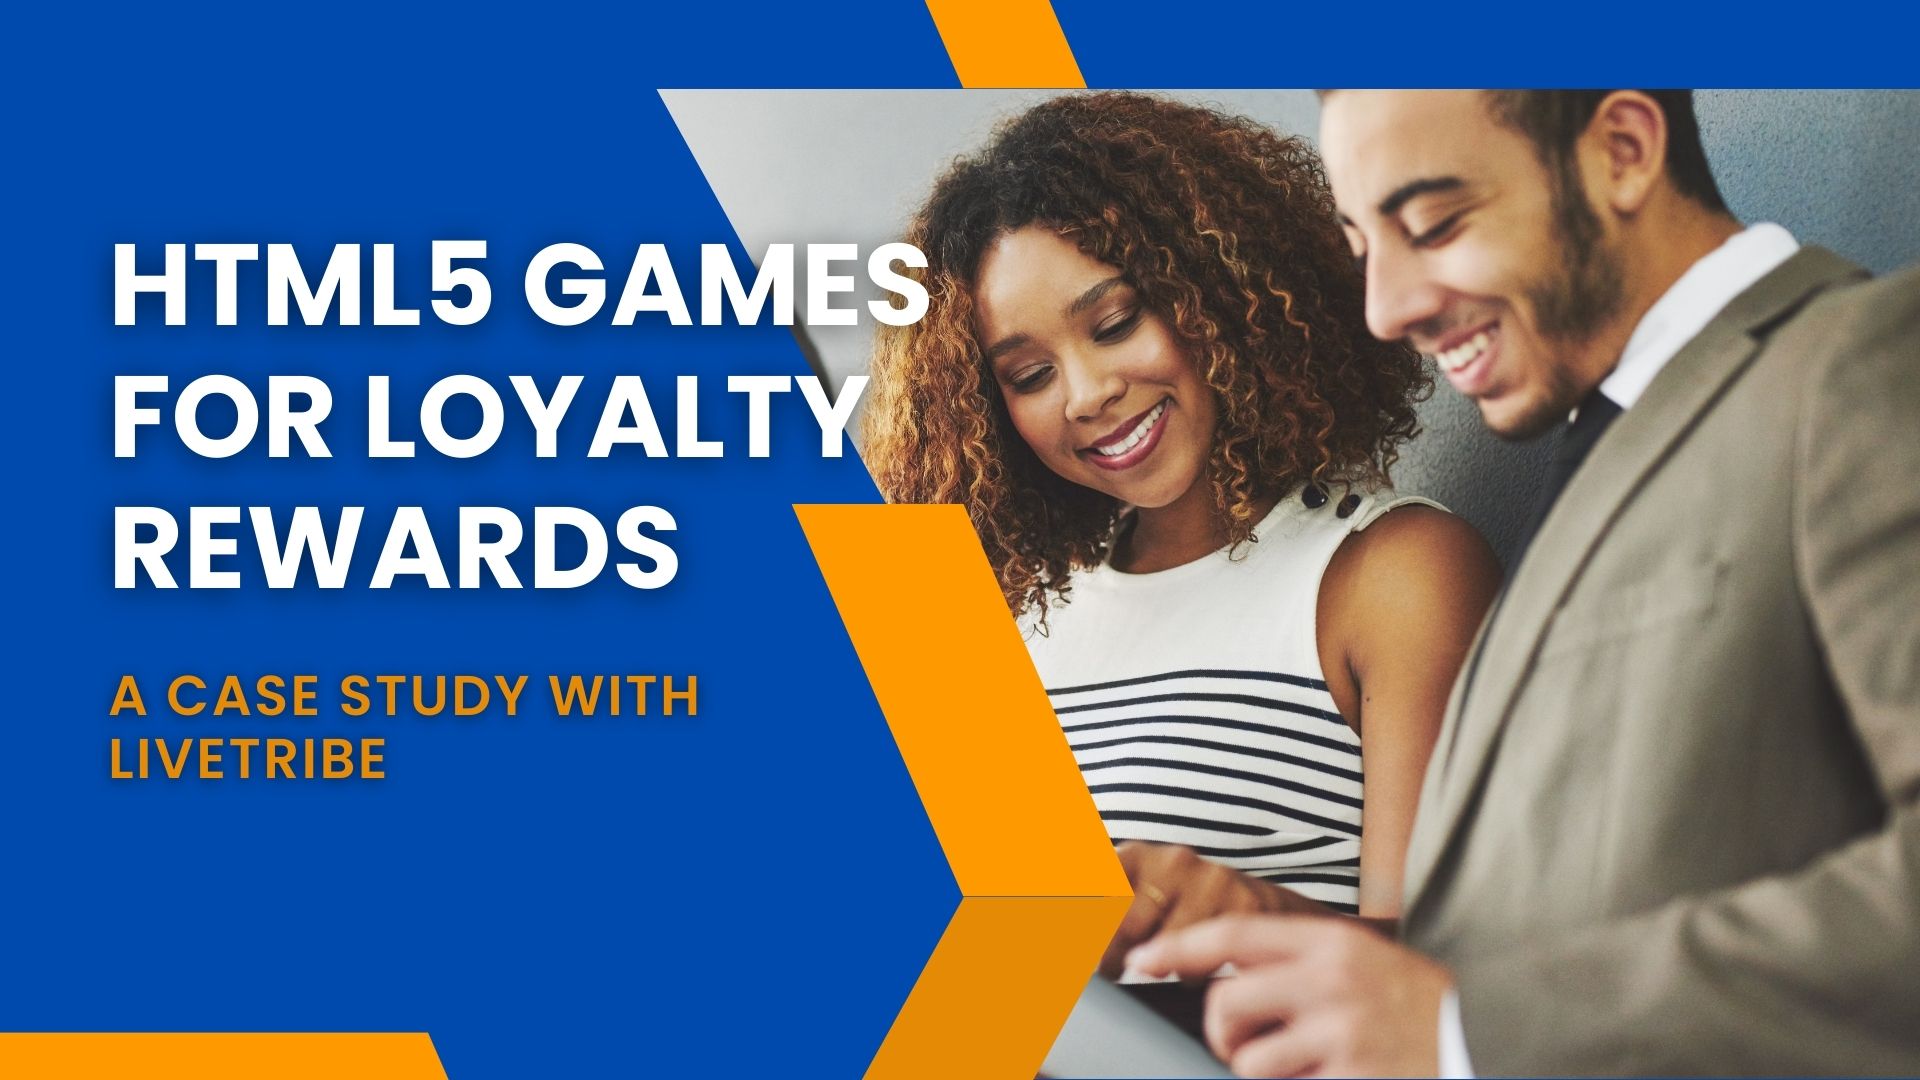 HTML5 Games For Loyalty Rewards - A Case Study with Livetribe